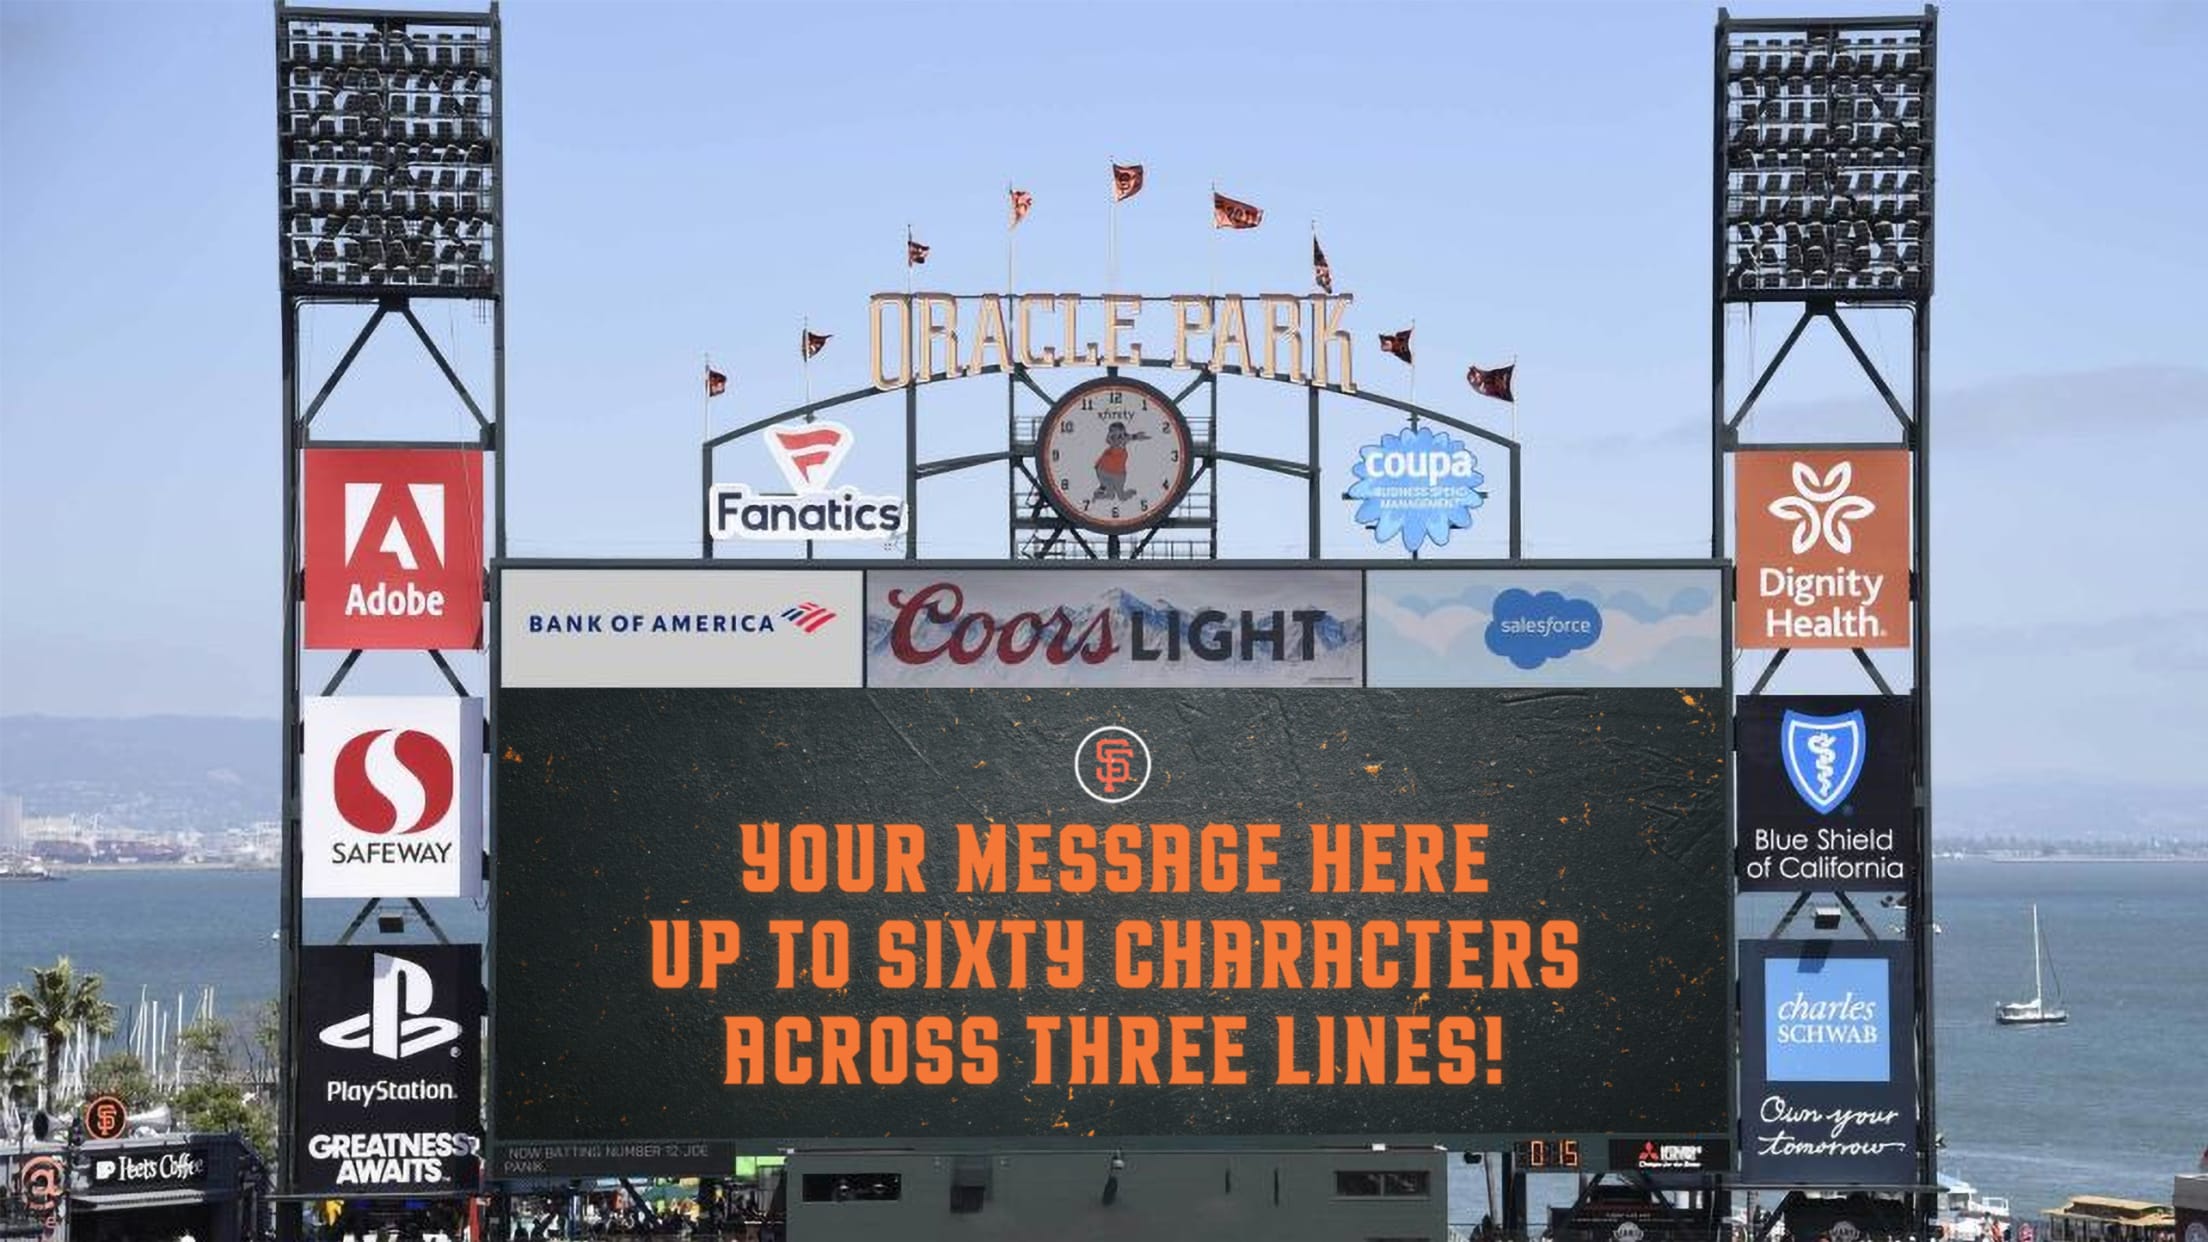 SFGiants on X: In honor of Fiesta Gigantes, the #SFGiants will